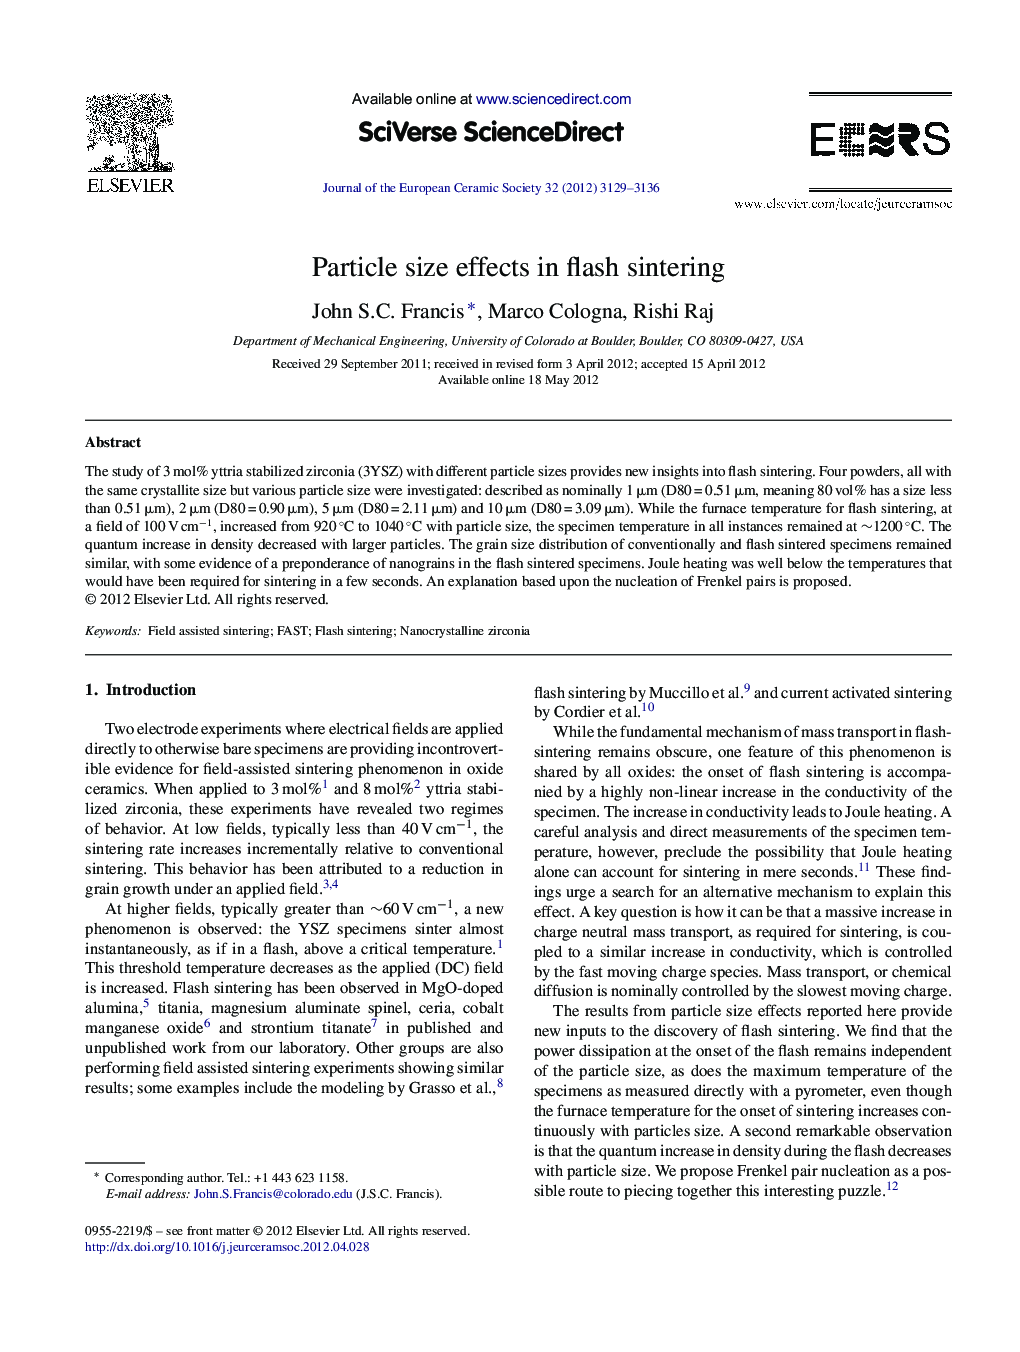 Particle size effects in flash sintering